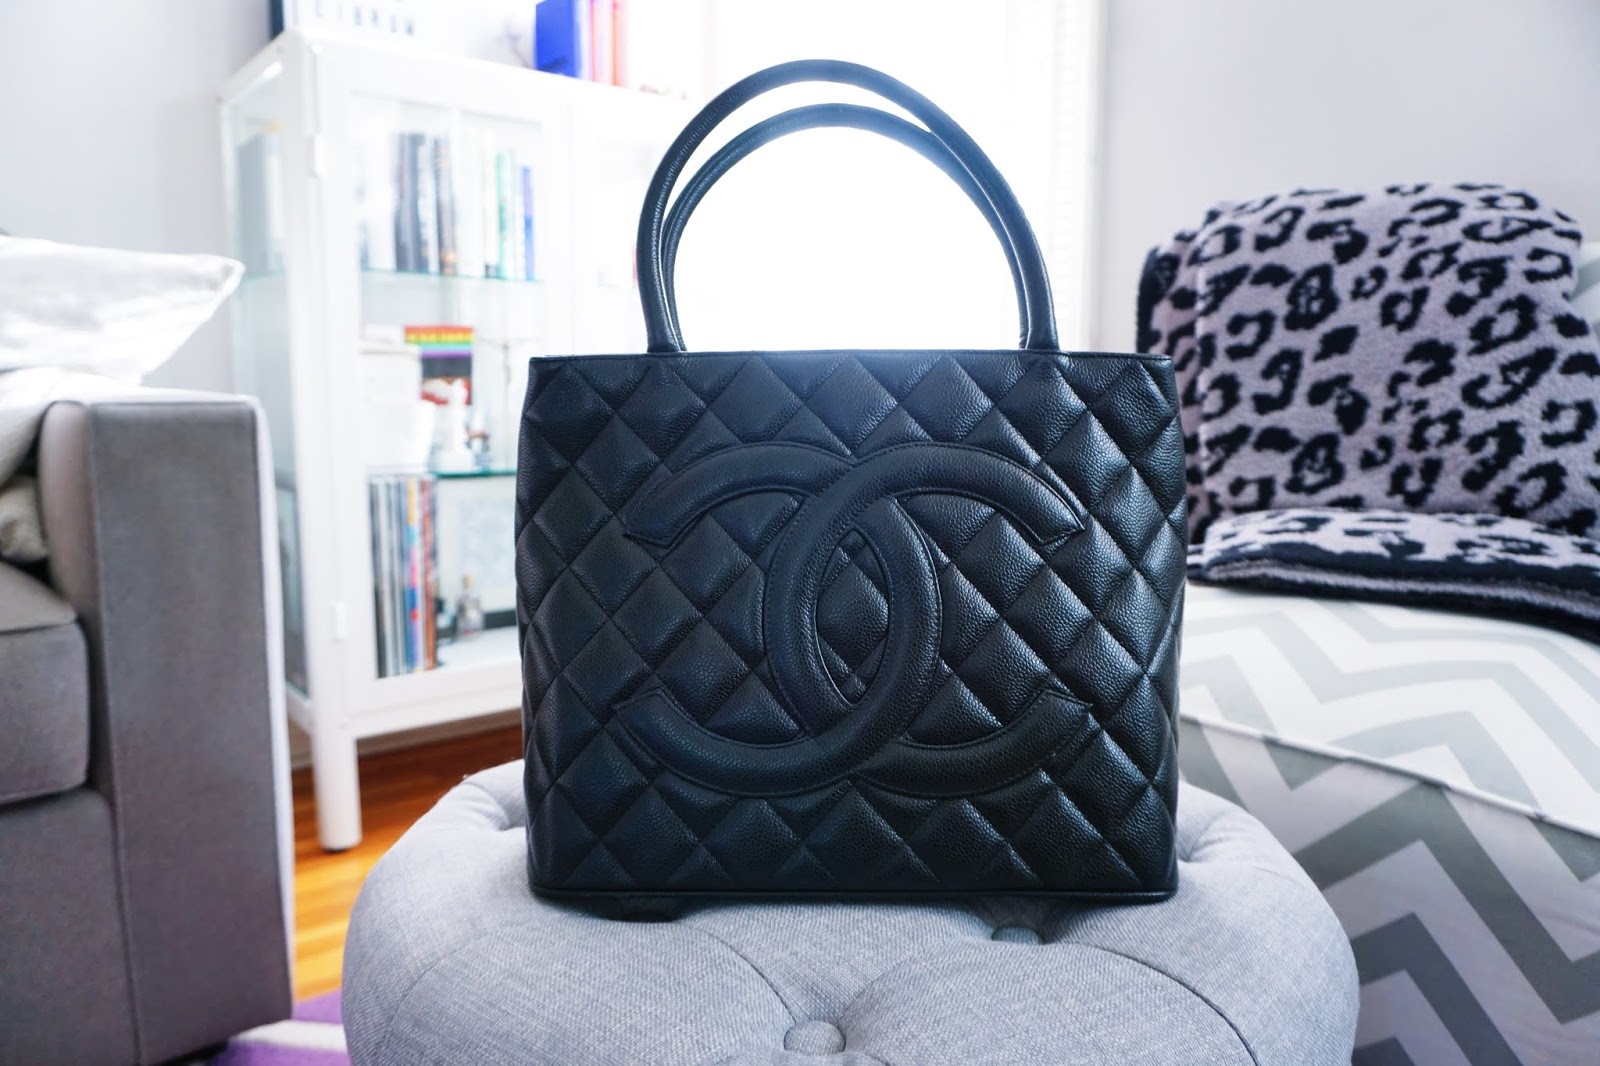 Chanel's New Website Design Sure Does Make It Look Like the Brand Will Sell  Bags Online Soon - PurseBlog